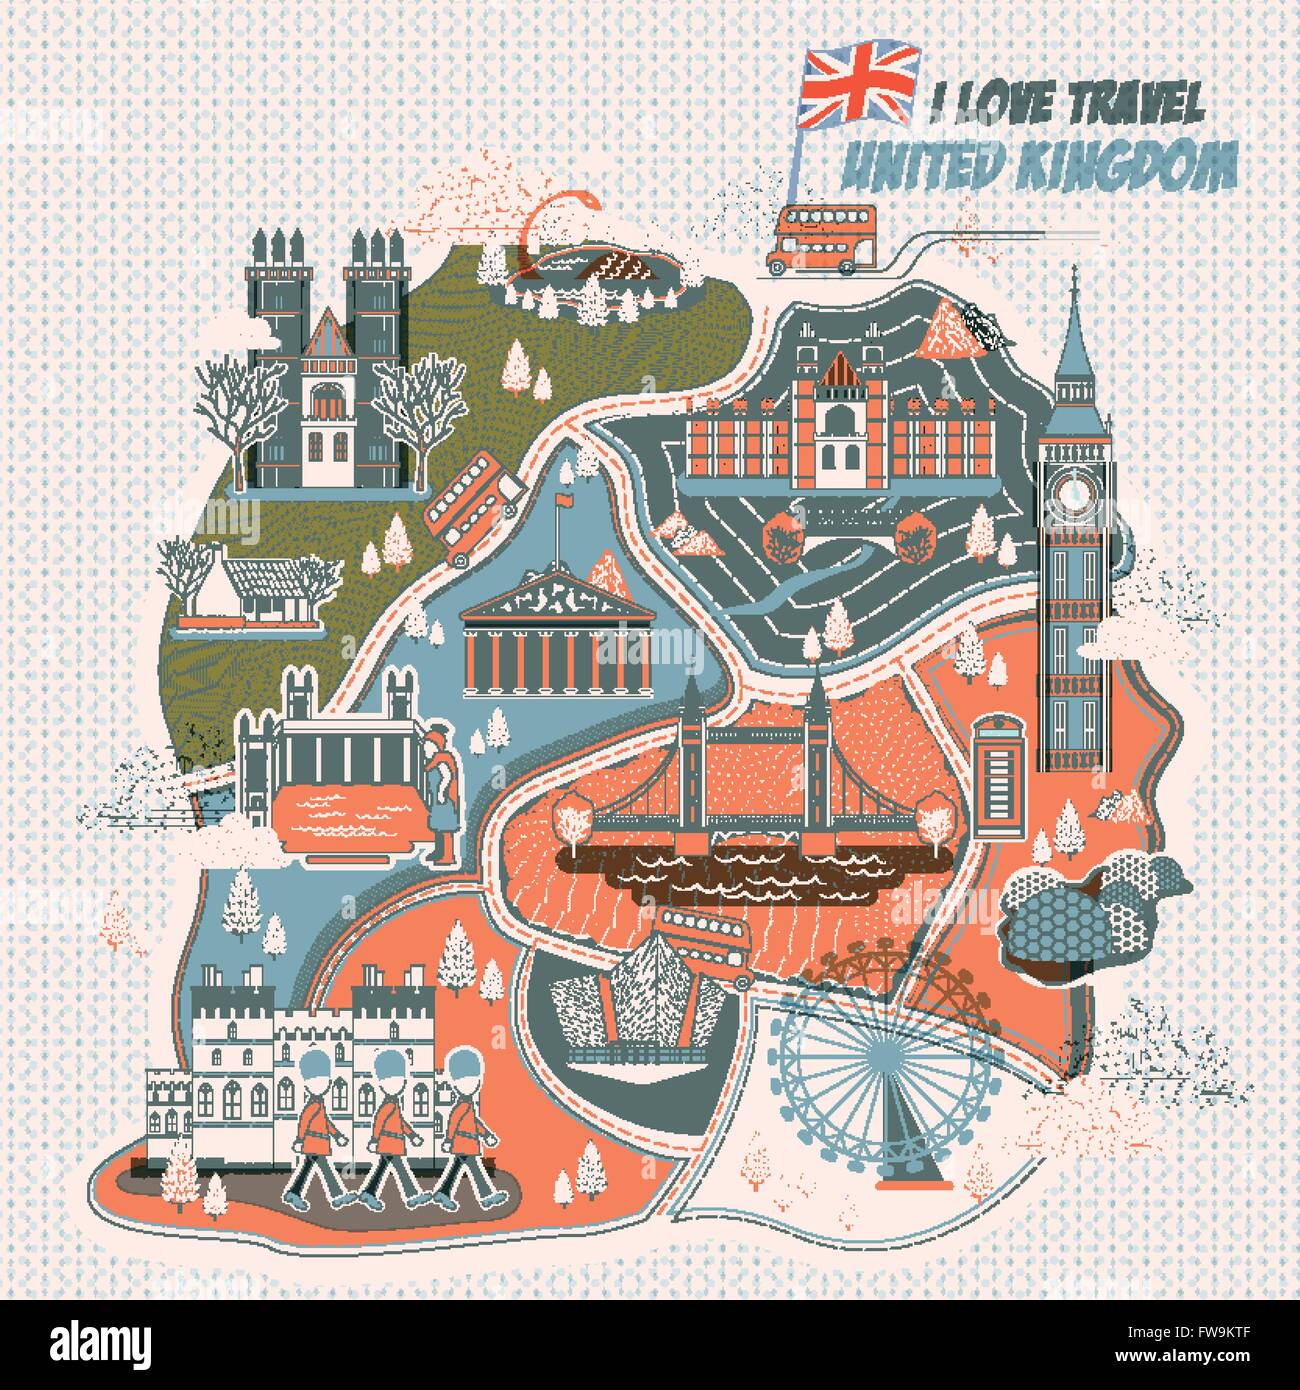 attractive United Kingdom travel poster design with attractions Stock Vector